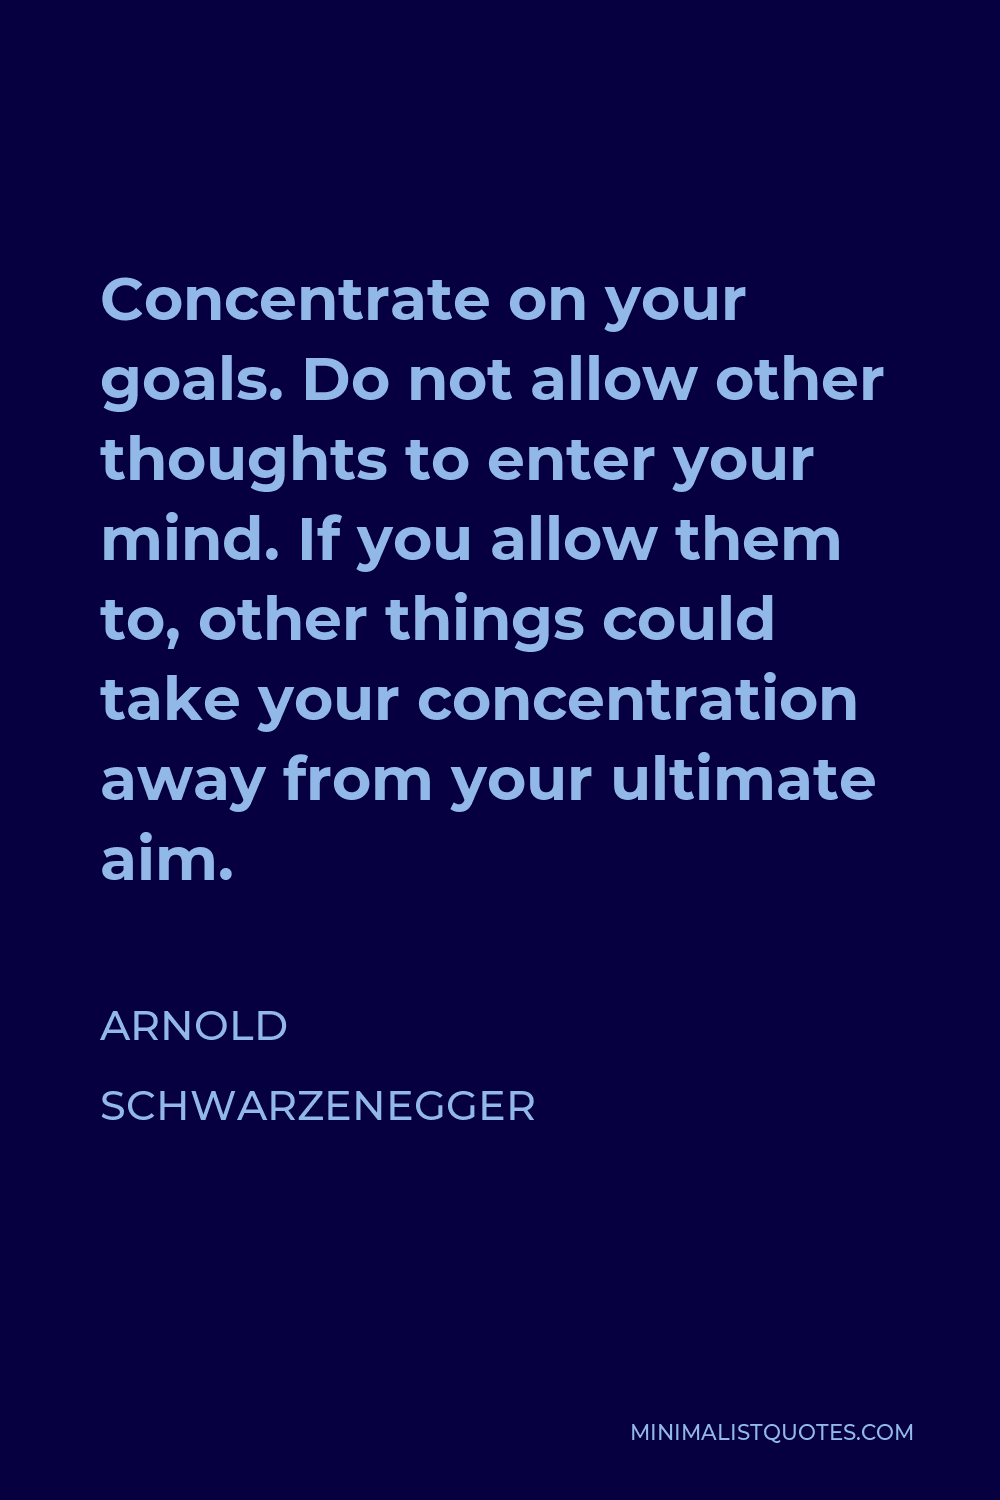 Arnold Schwarzenegger Quote - Concentrate on your goals. Do not allow other thoughts to enter your mind. If you allow them to, other things could take your concentration away from your ultimate aim.